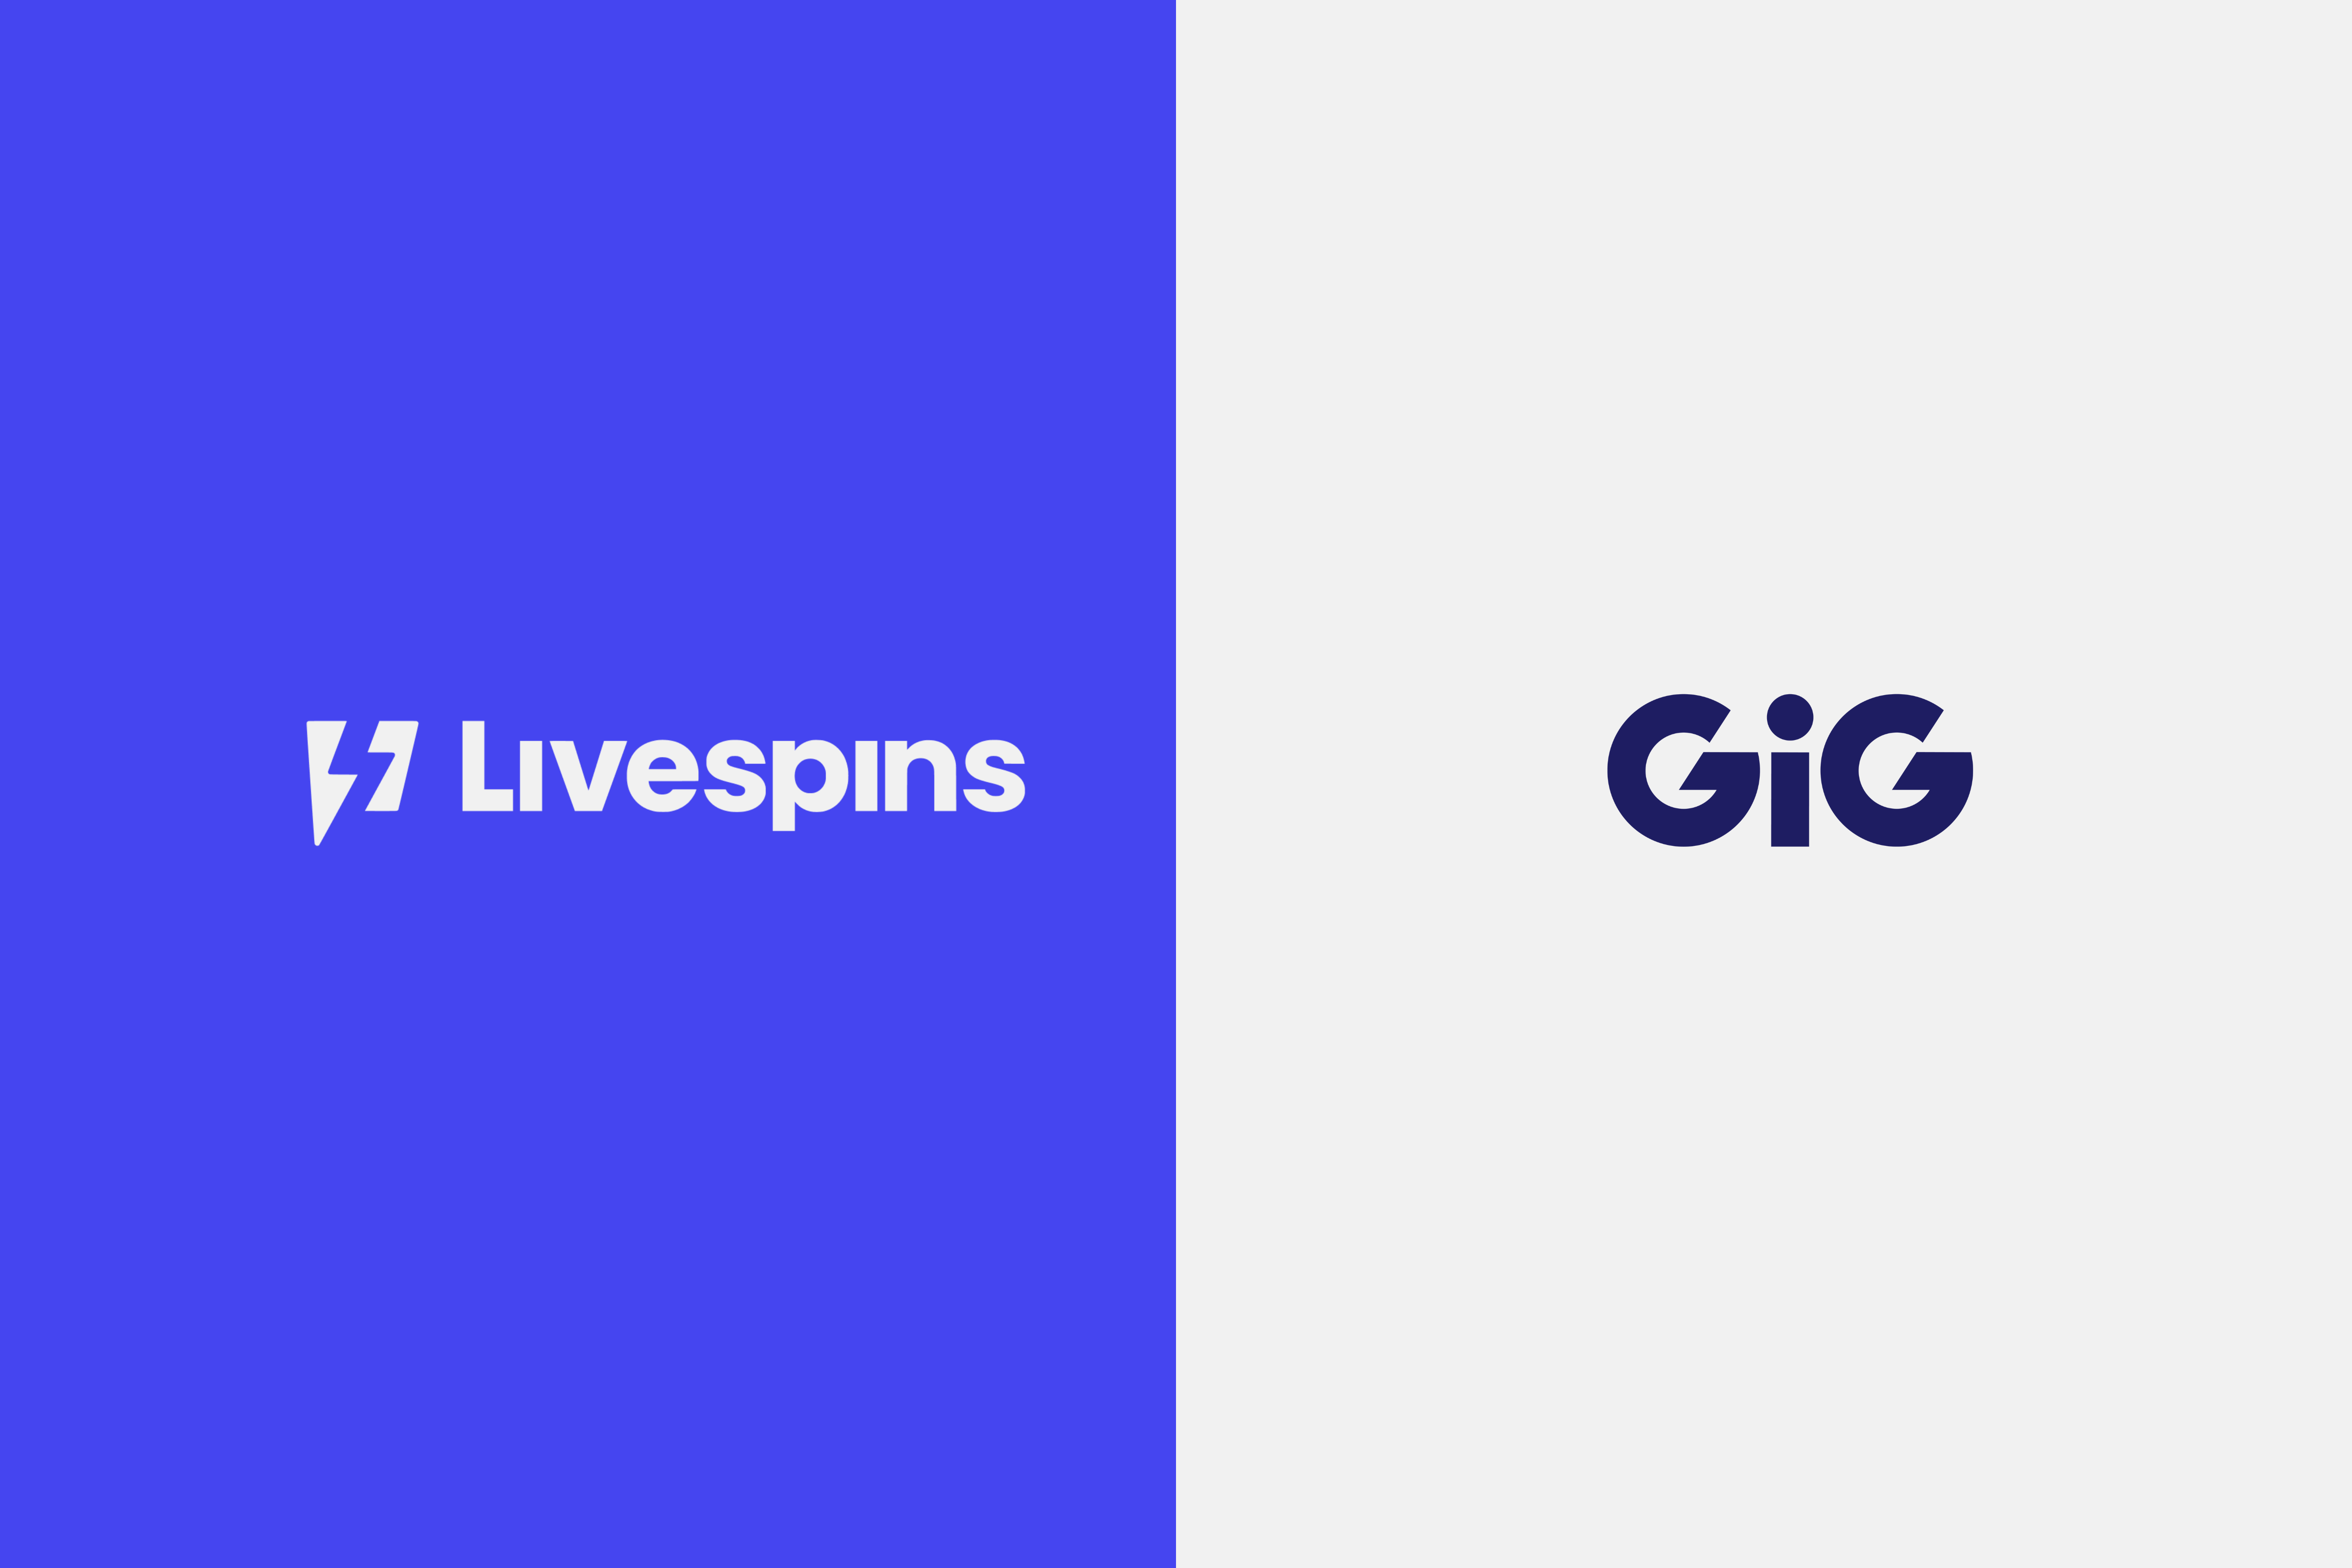 Livespins grows its reach with GiG partnership